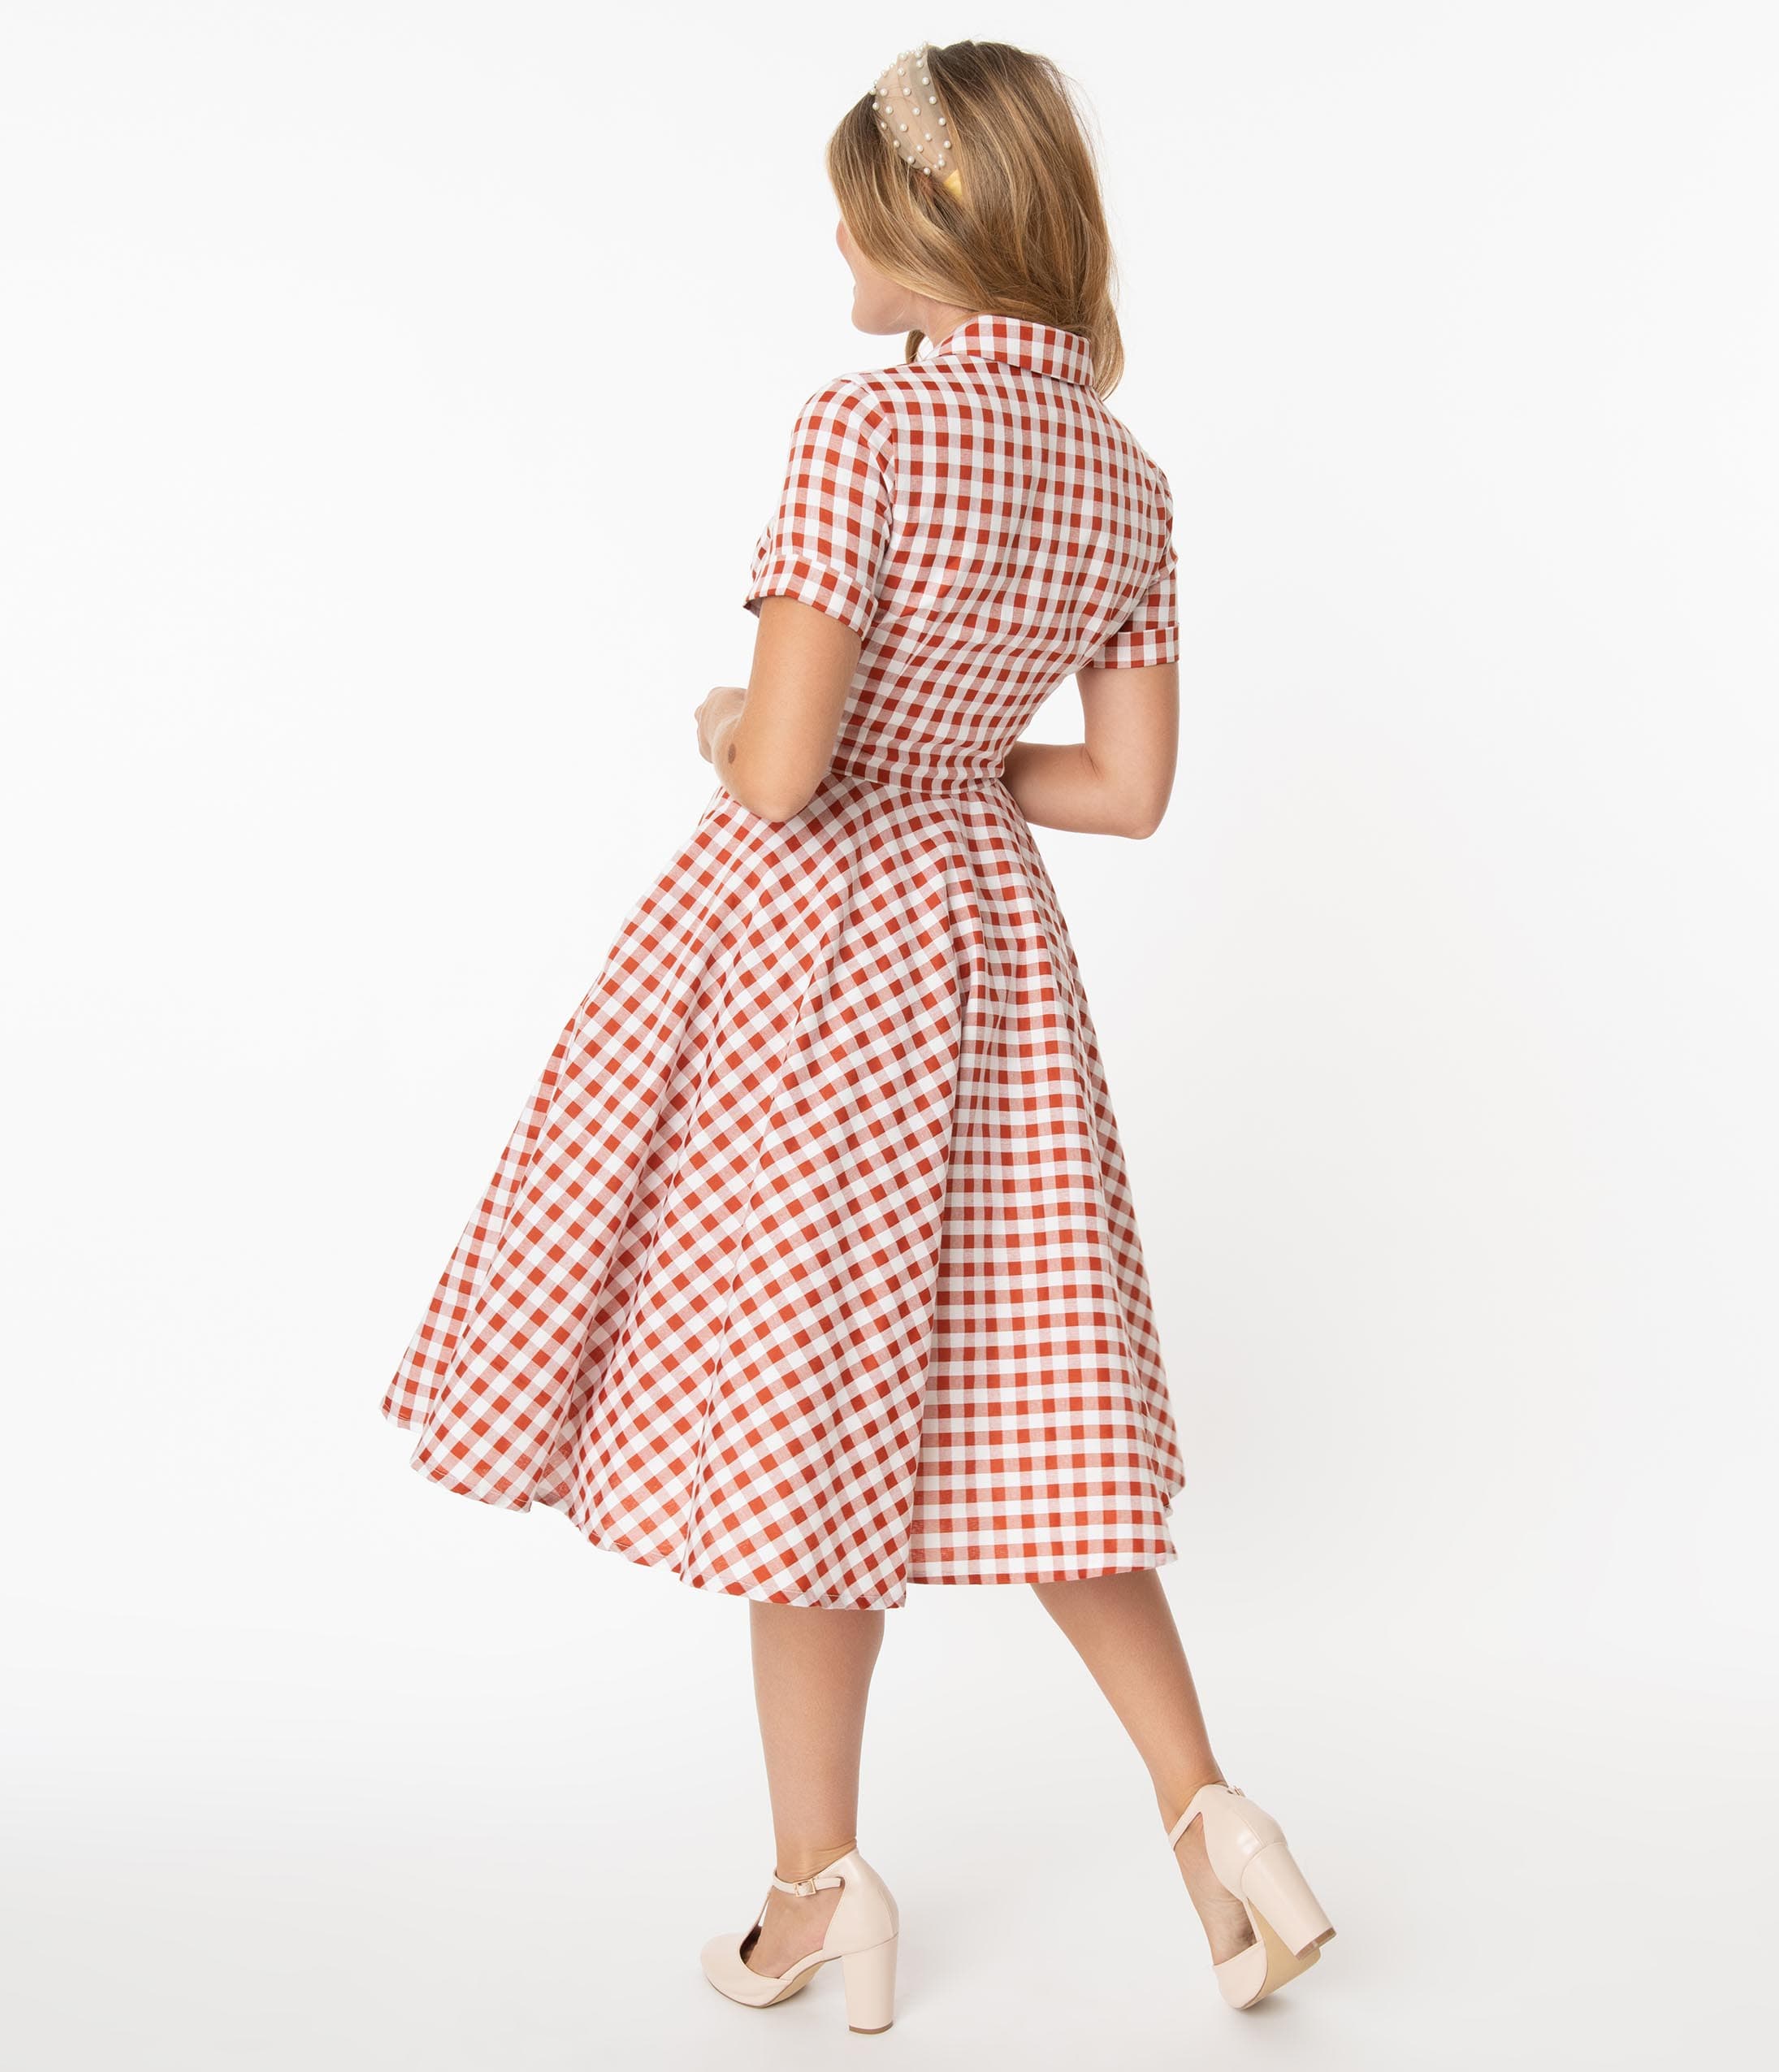 red and white checkered dress costume